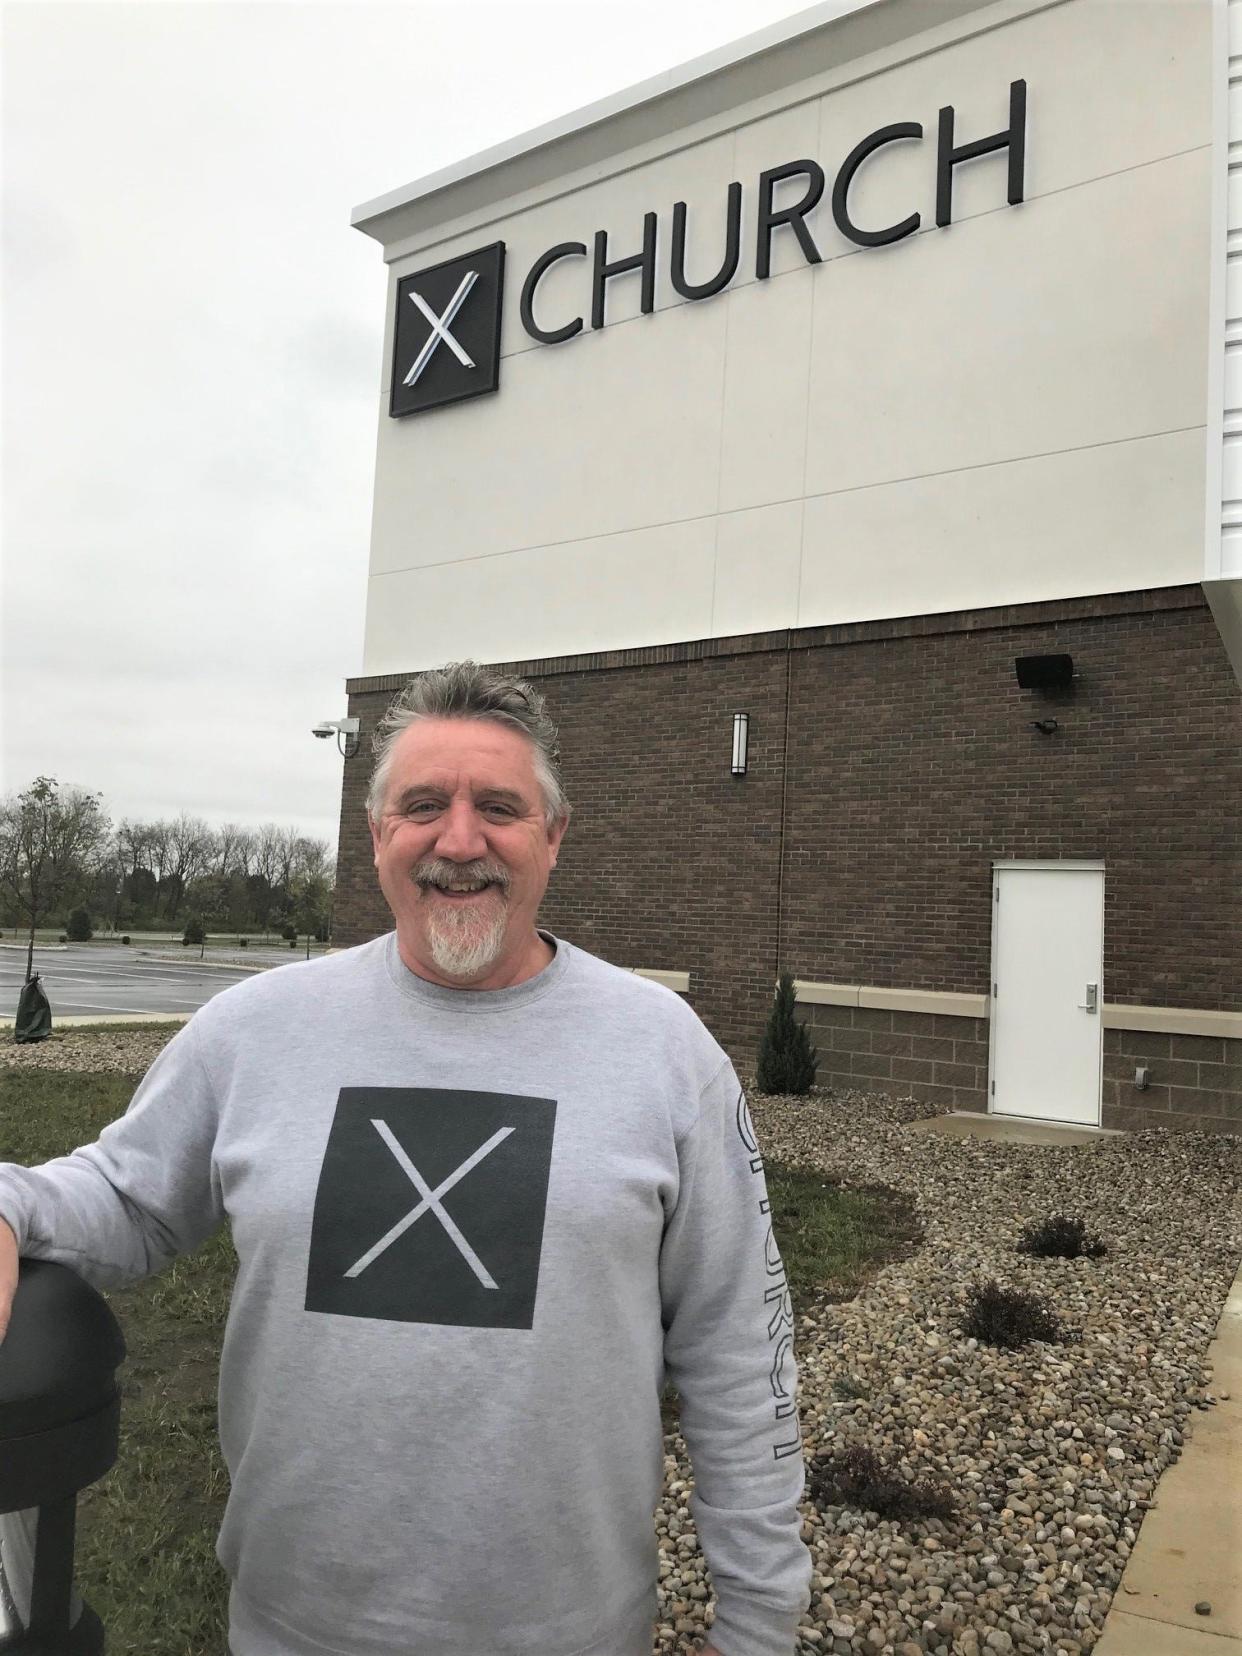 X Church associate pastor Steve Rauch, shown in this Eagle-Gazette file photo, will fight Allen Chapel pastor Evan Saunders Sunday in a charity boxing match.